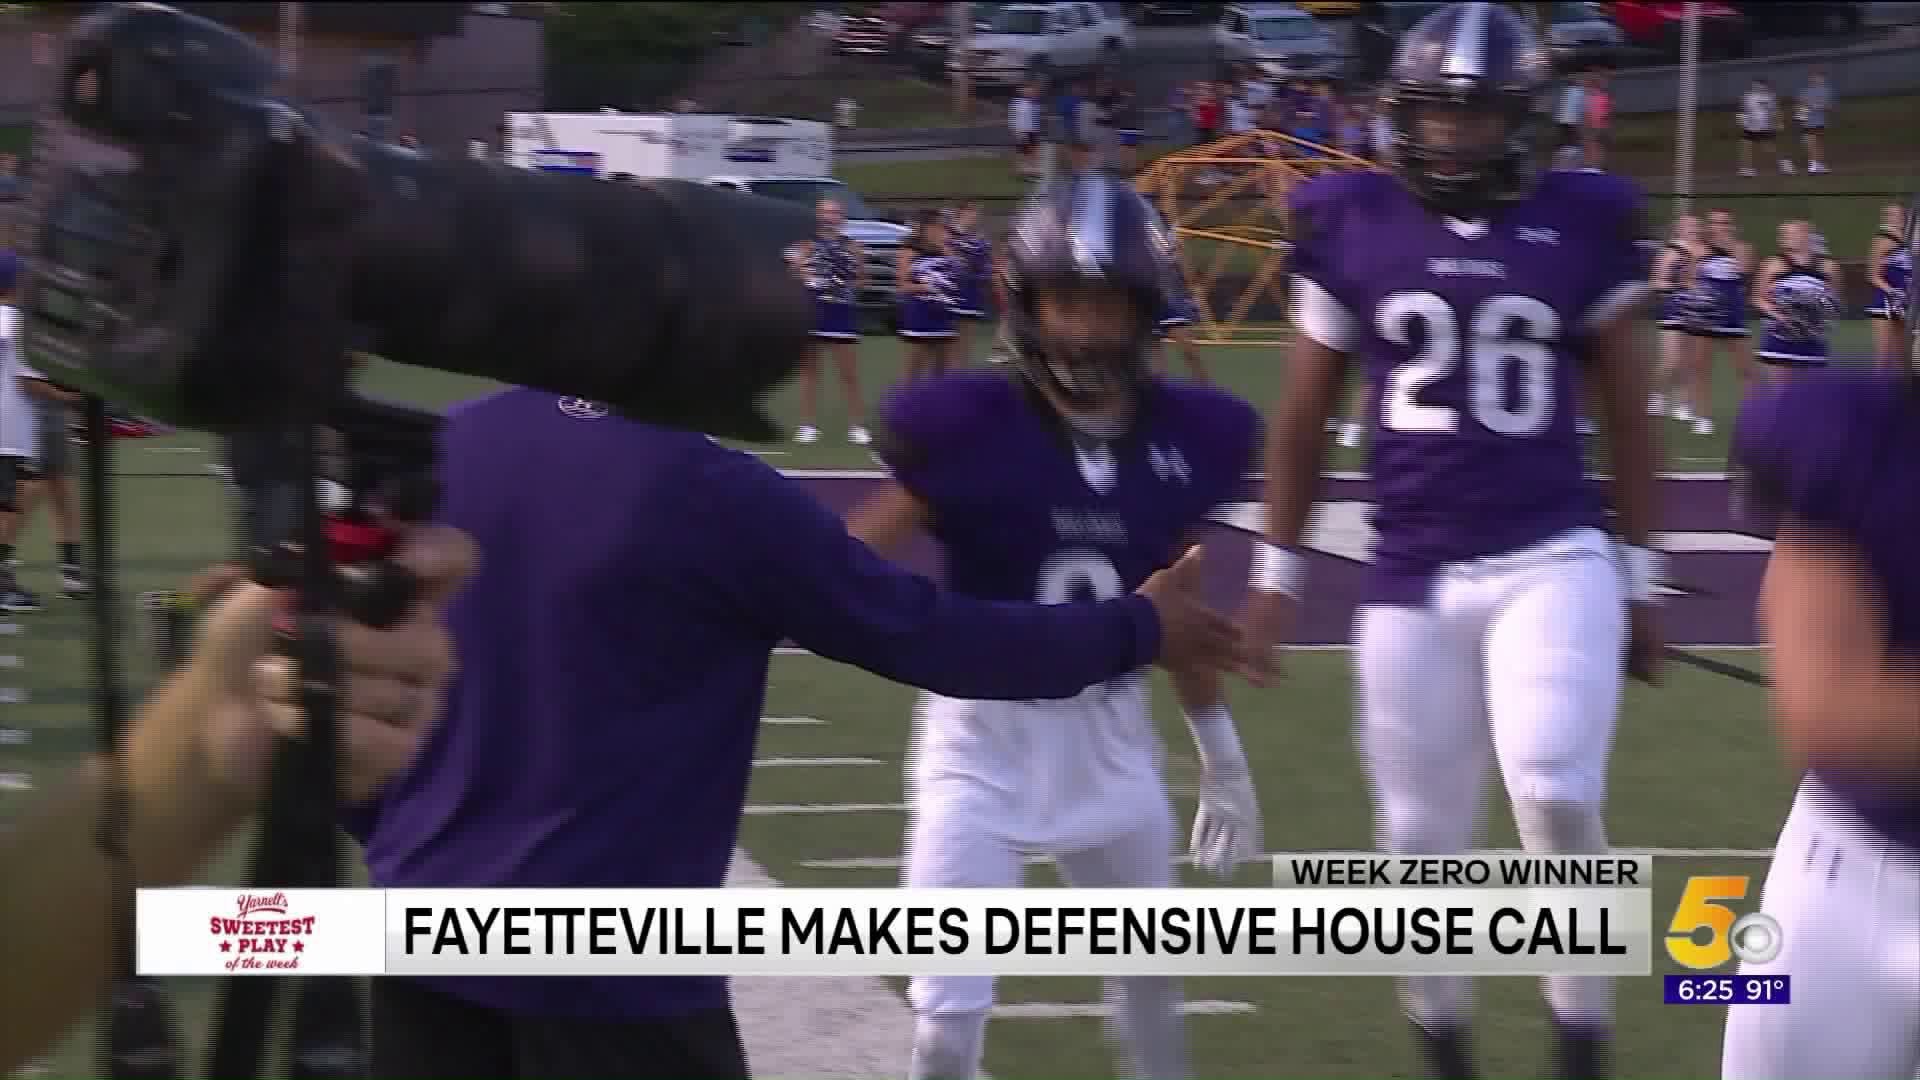 Fayetteville takes Sweetest Play title